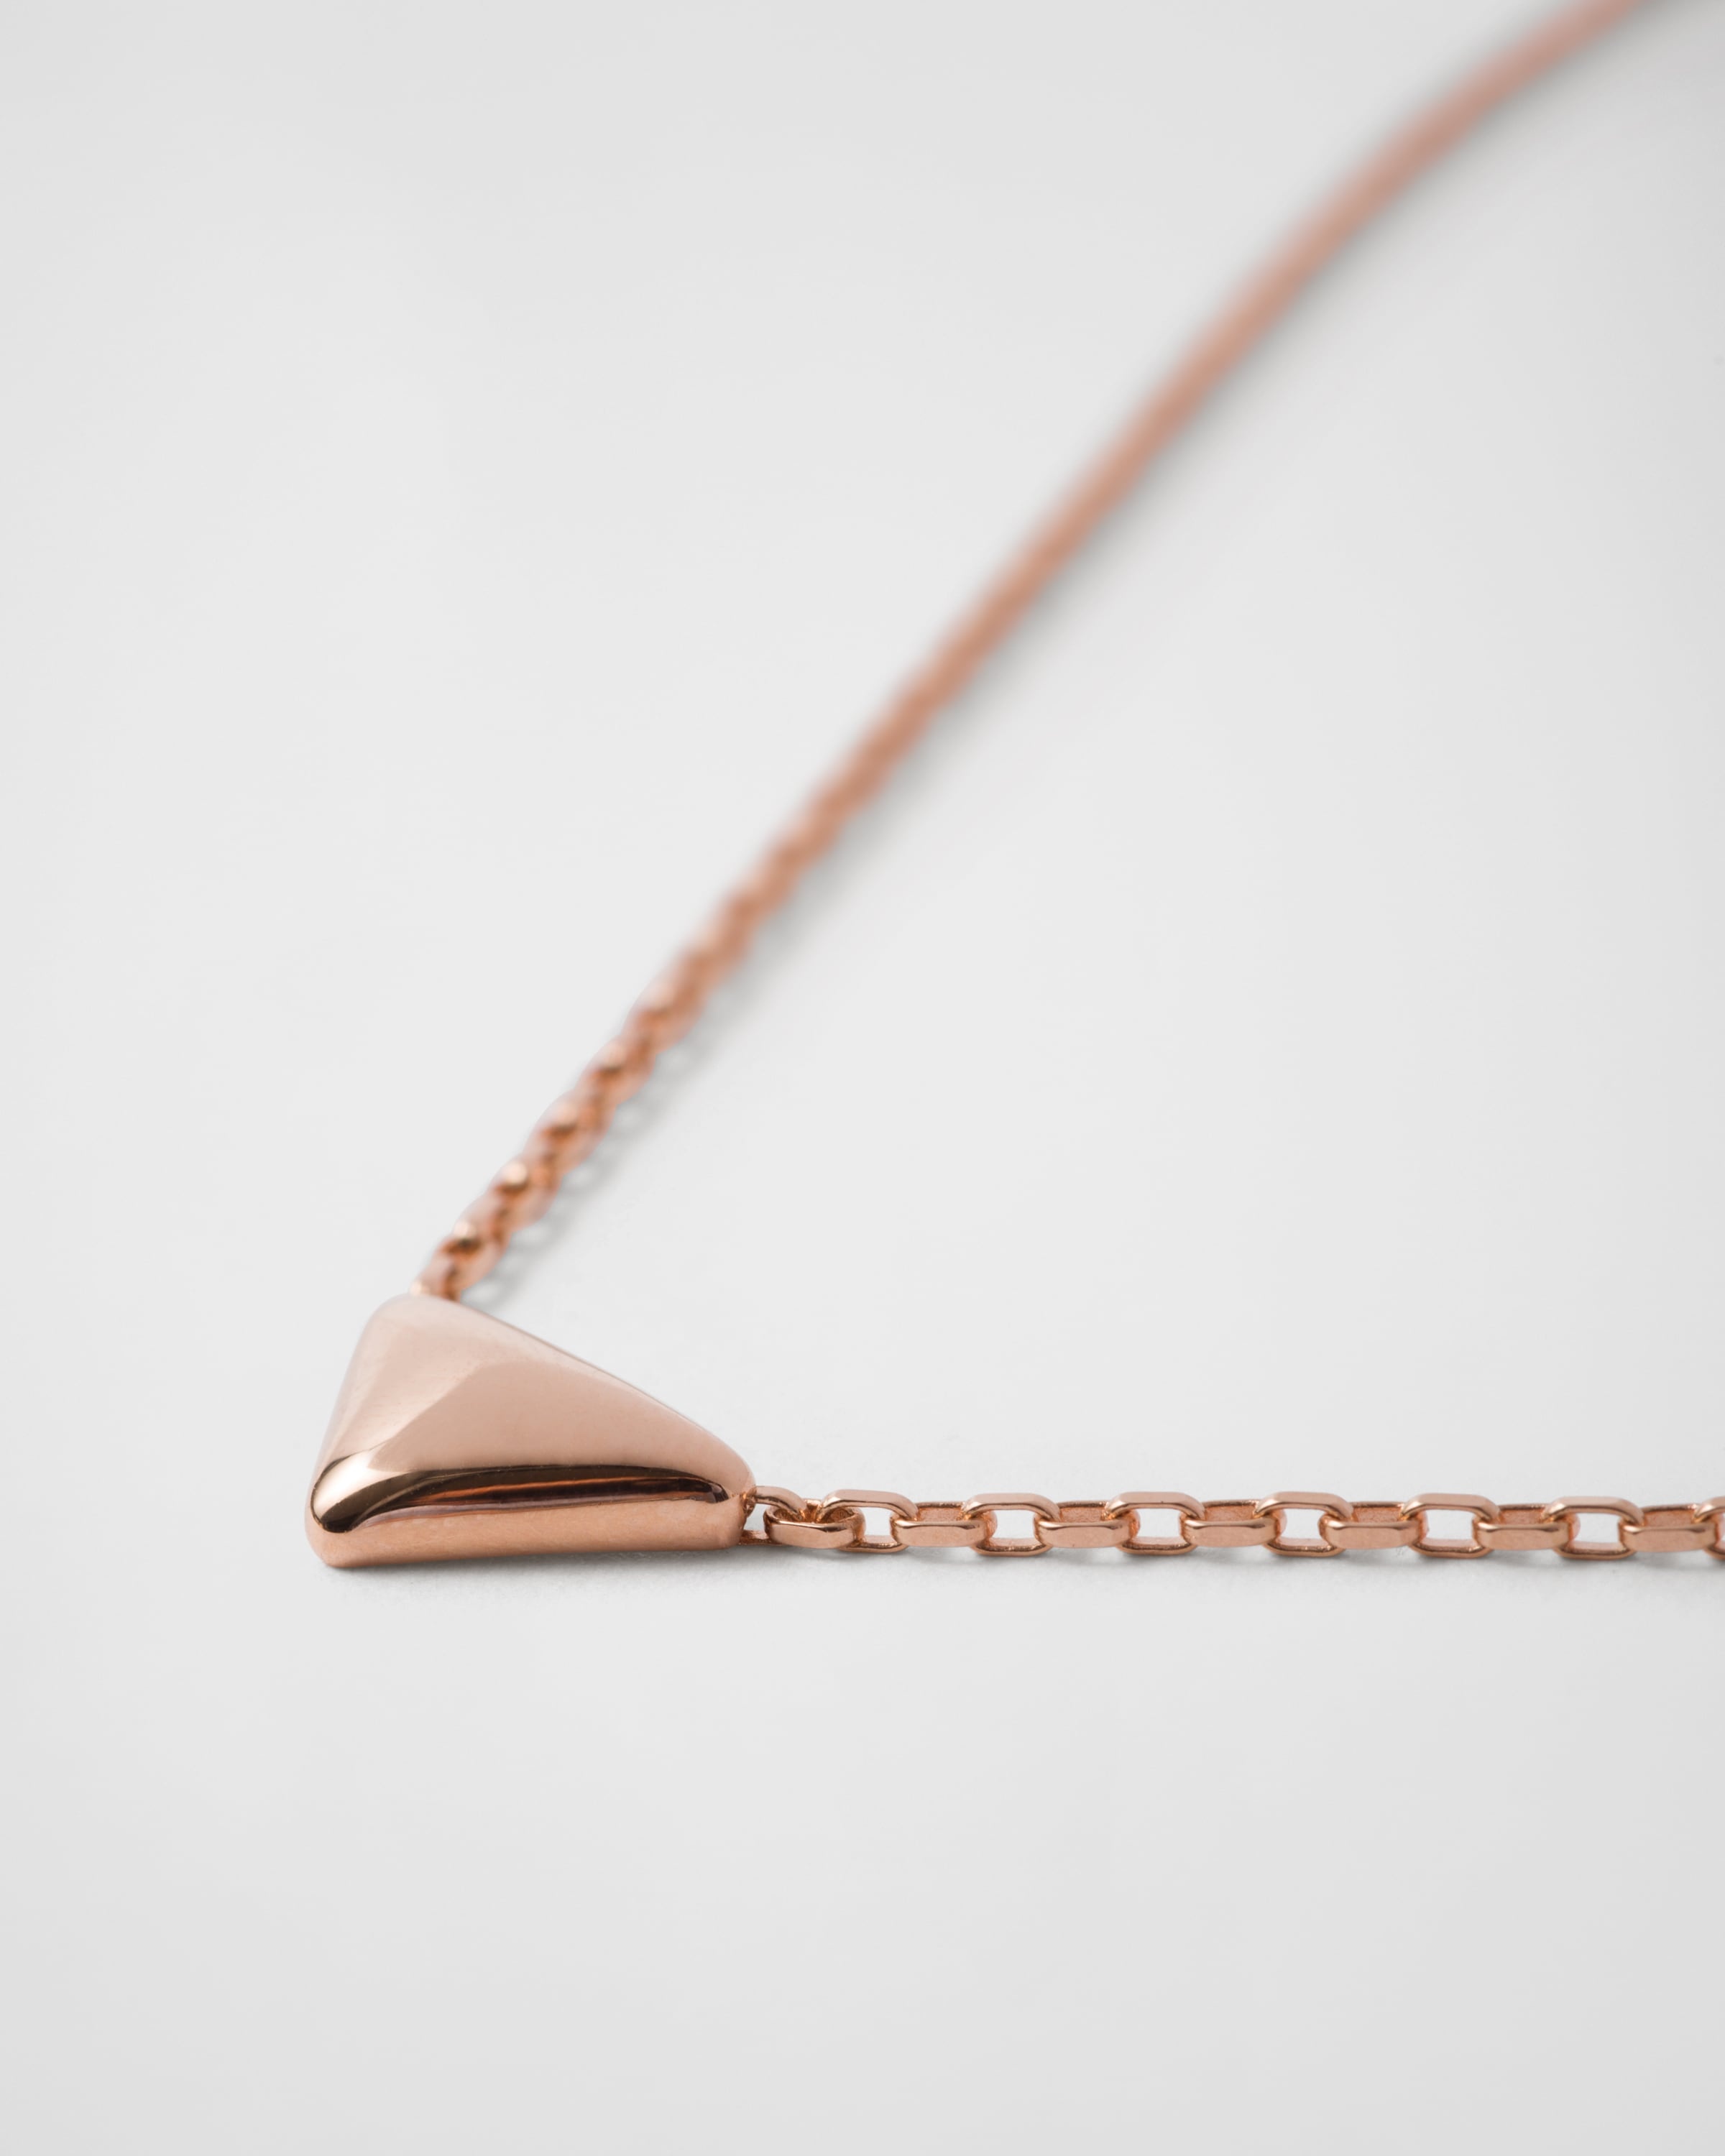 Eternal Gold necklace in pink gold with nano triangle pendant - 3